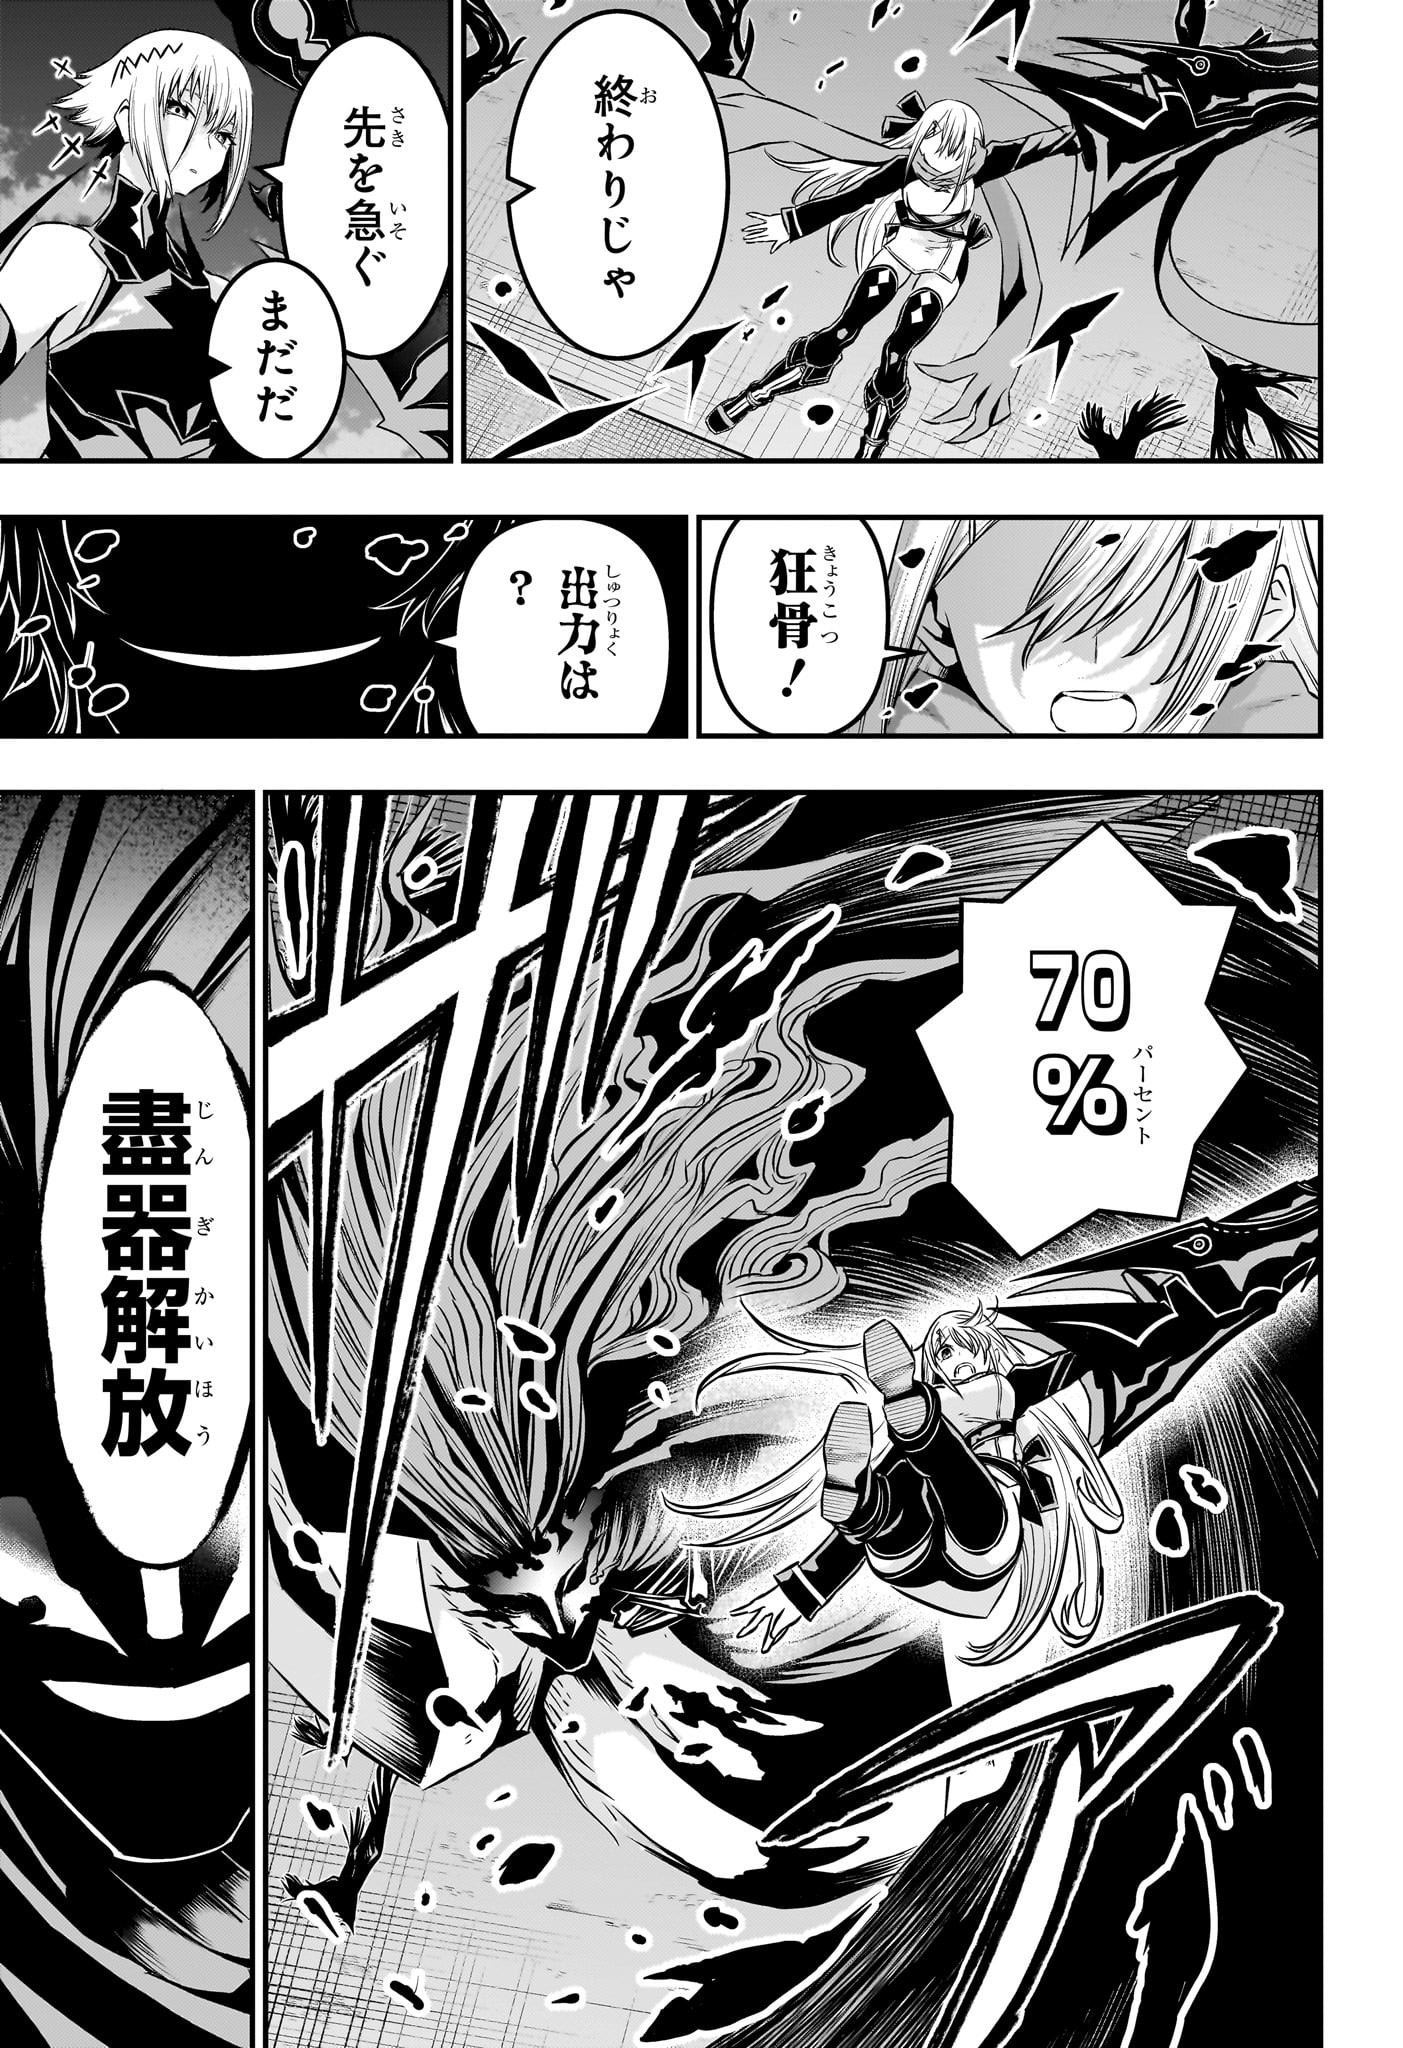 Nue no Onmyouji - Chapter 58 - Page 17